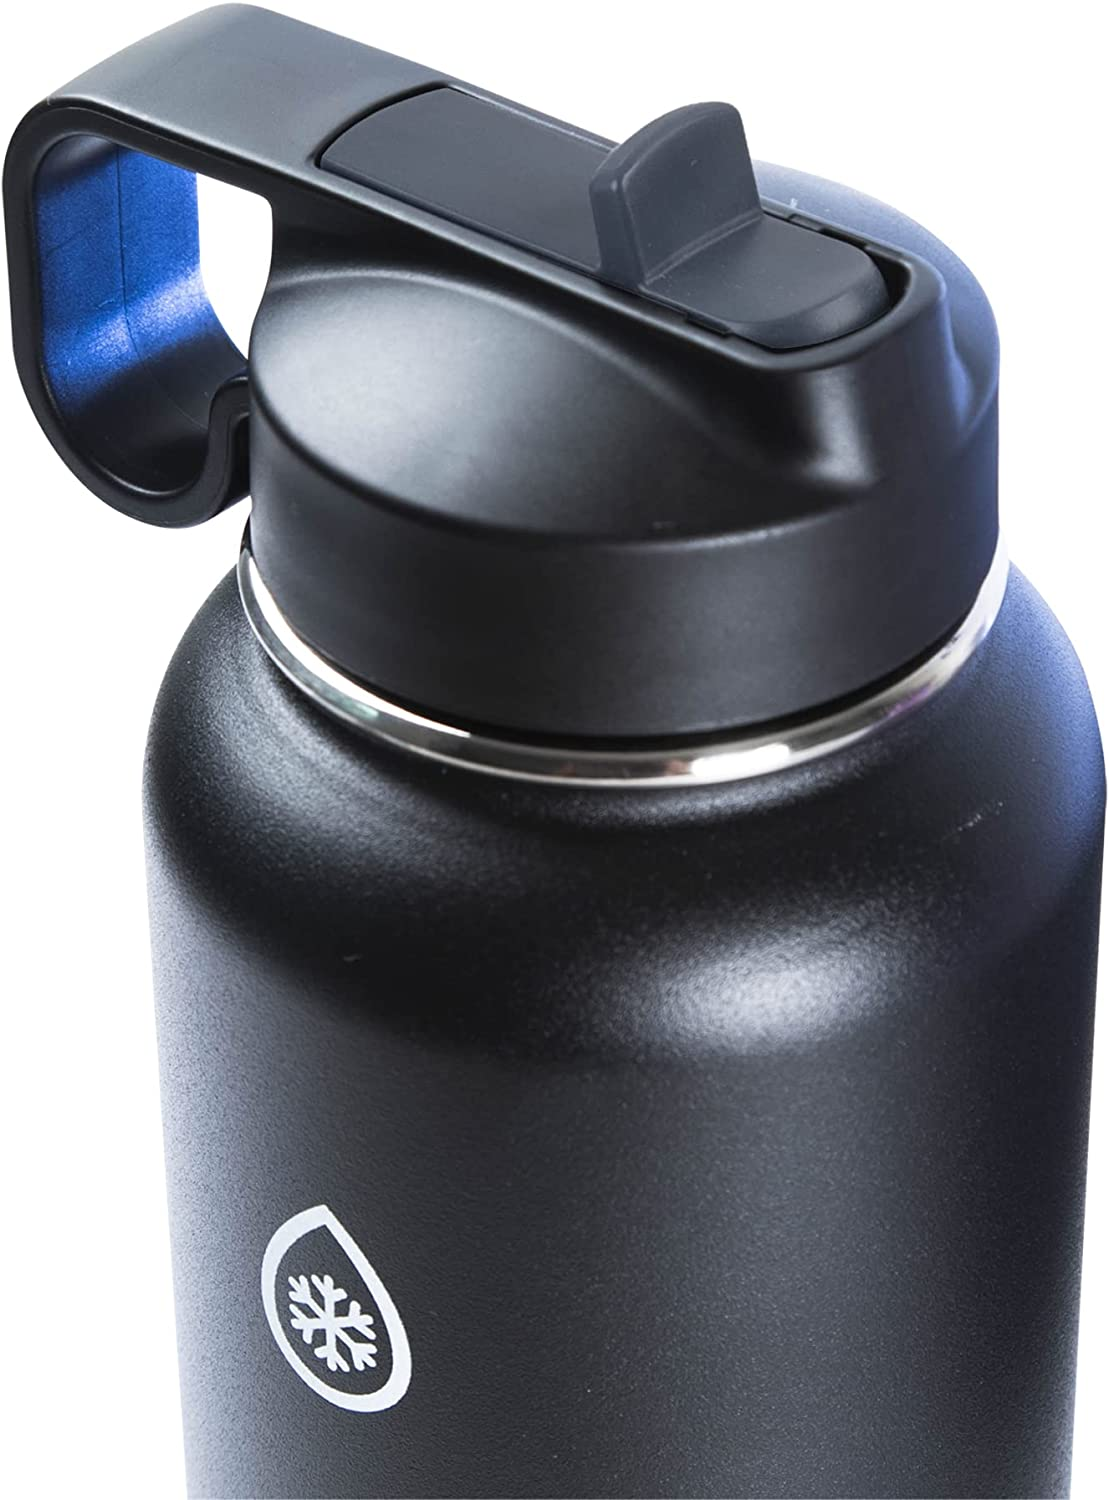 Double Stainless Steel Insulated Water Bottle with Two Lids, 18 Ounce, Black